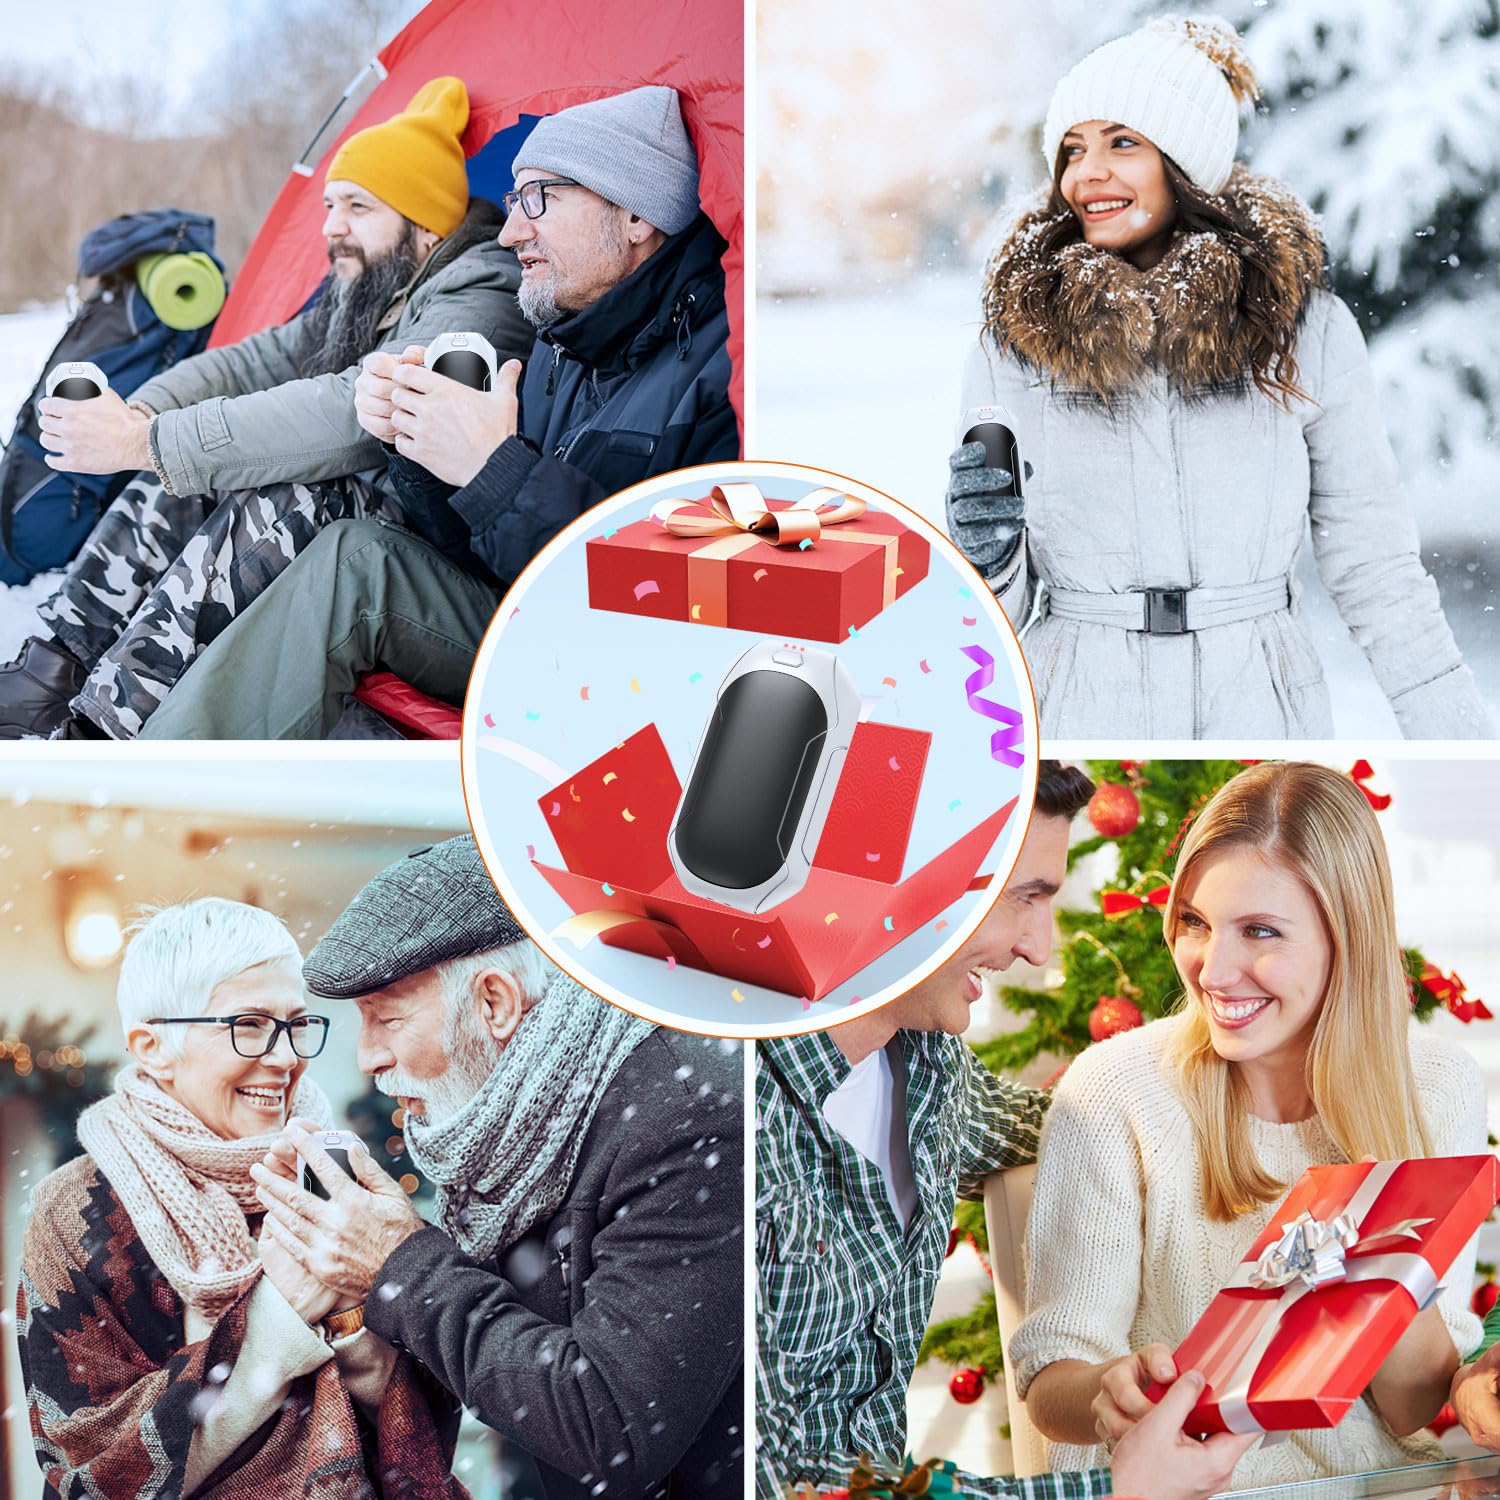 Hand Warmers Rechargeable, 5200mAh Electric Portable Pocket Heater 2 in 1 Electric Handwarmers, Heat Therapy Great for Hunting, Camping, Outdoors